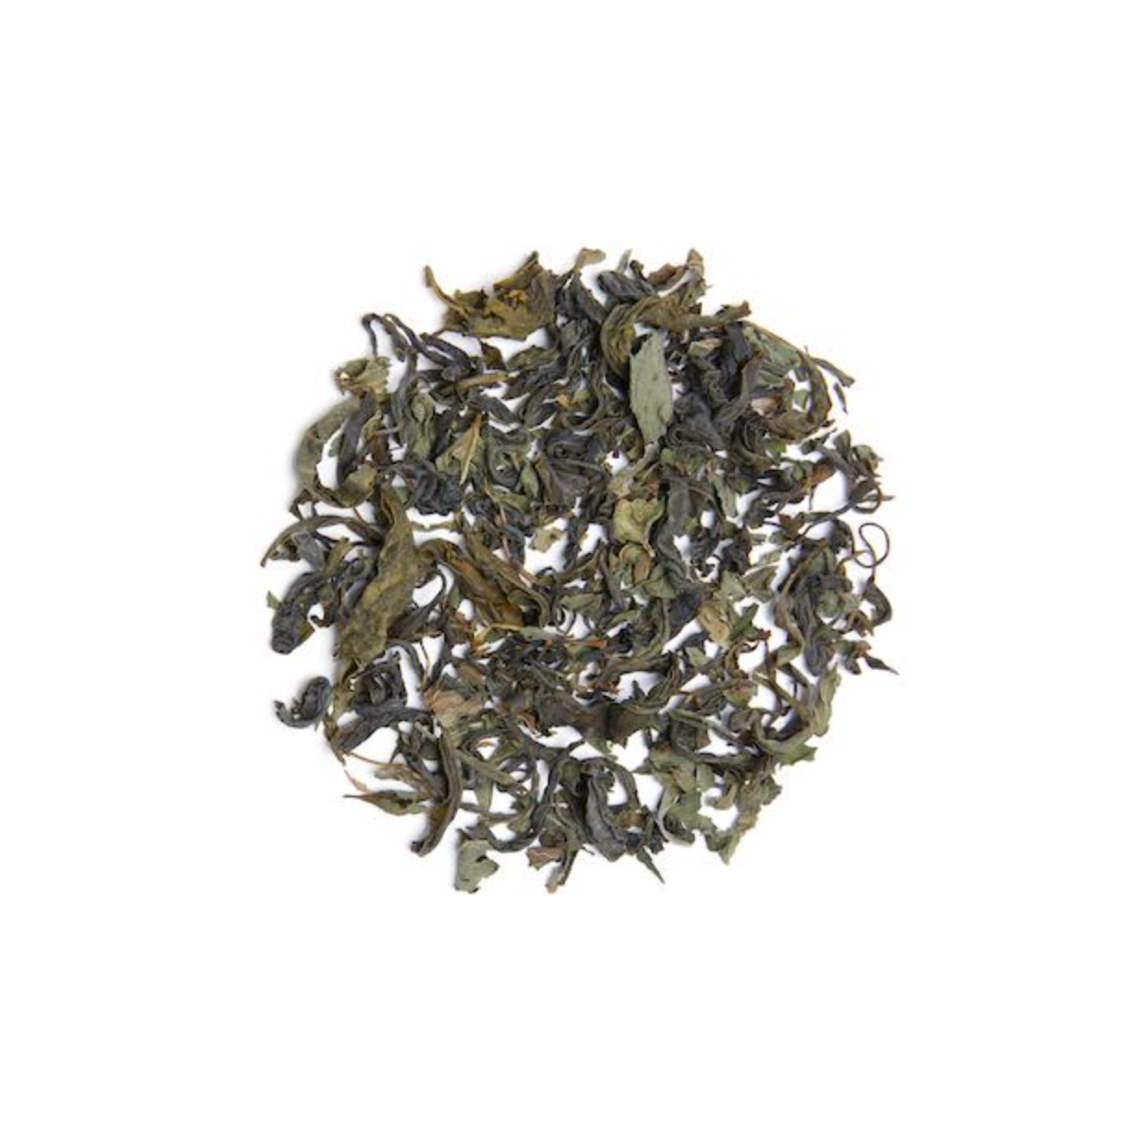 Wild Orchard Tea Peppermint Green - Loose Leaf Bag - 6 Bags by Farm2Me